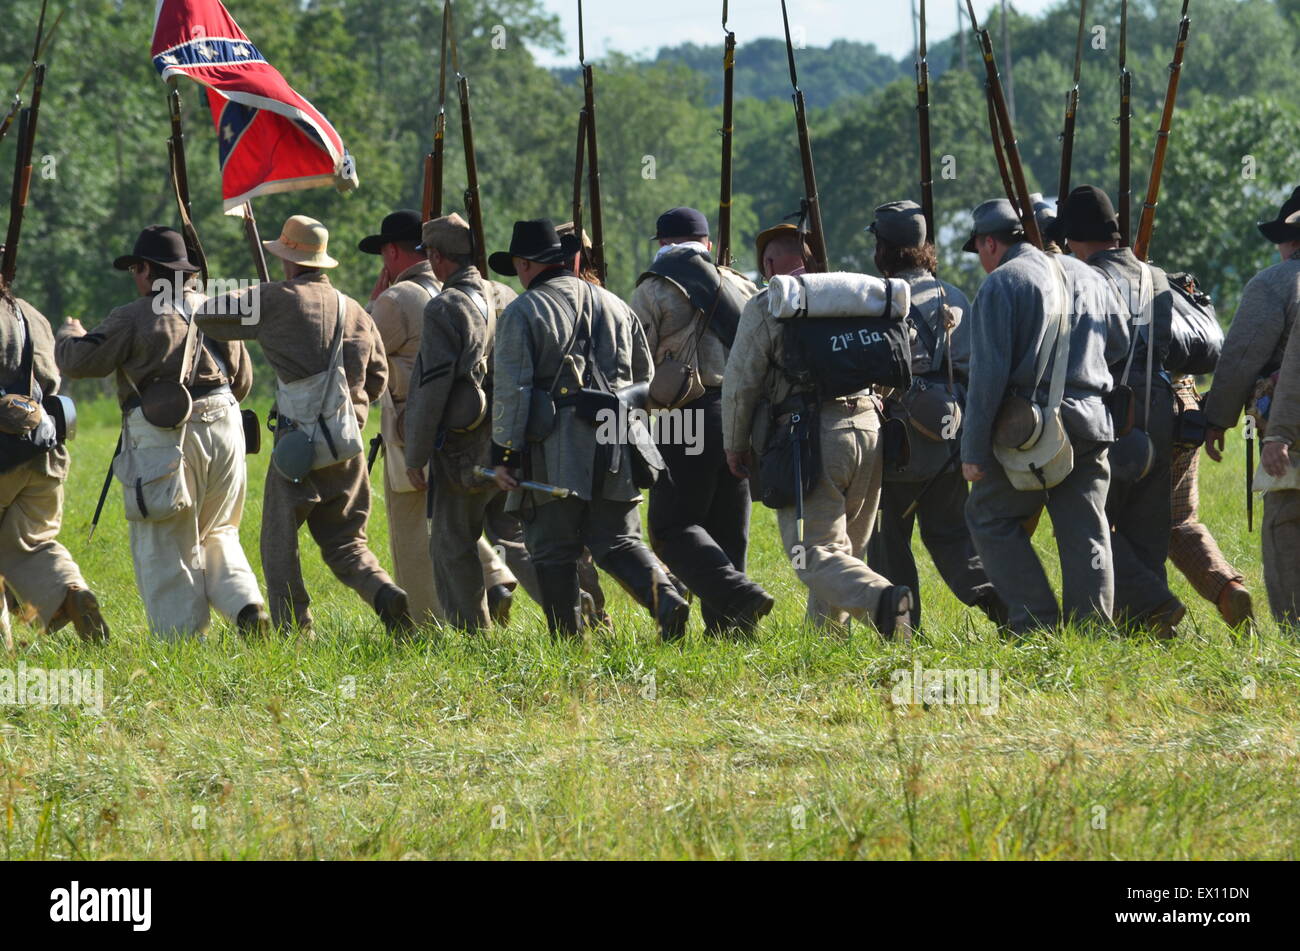 Civil war re-enactment Confederate south solider marching Gettysburg Stock Photo